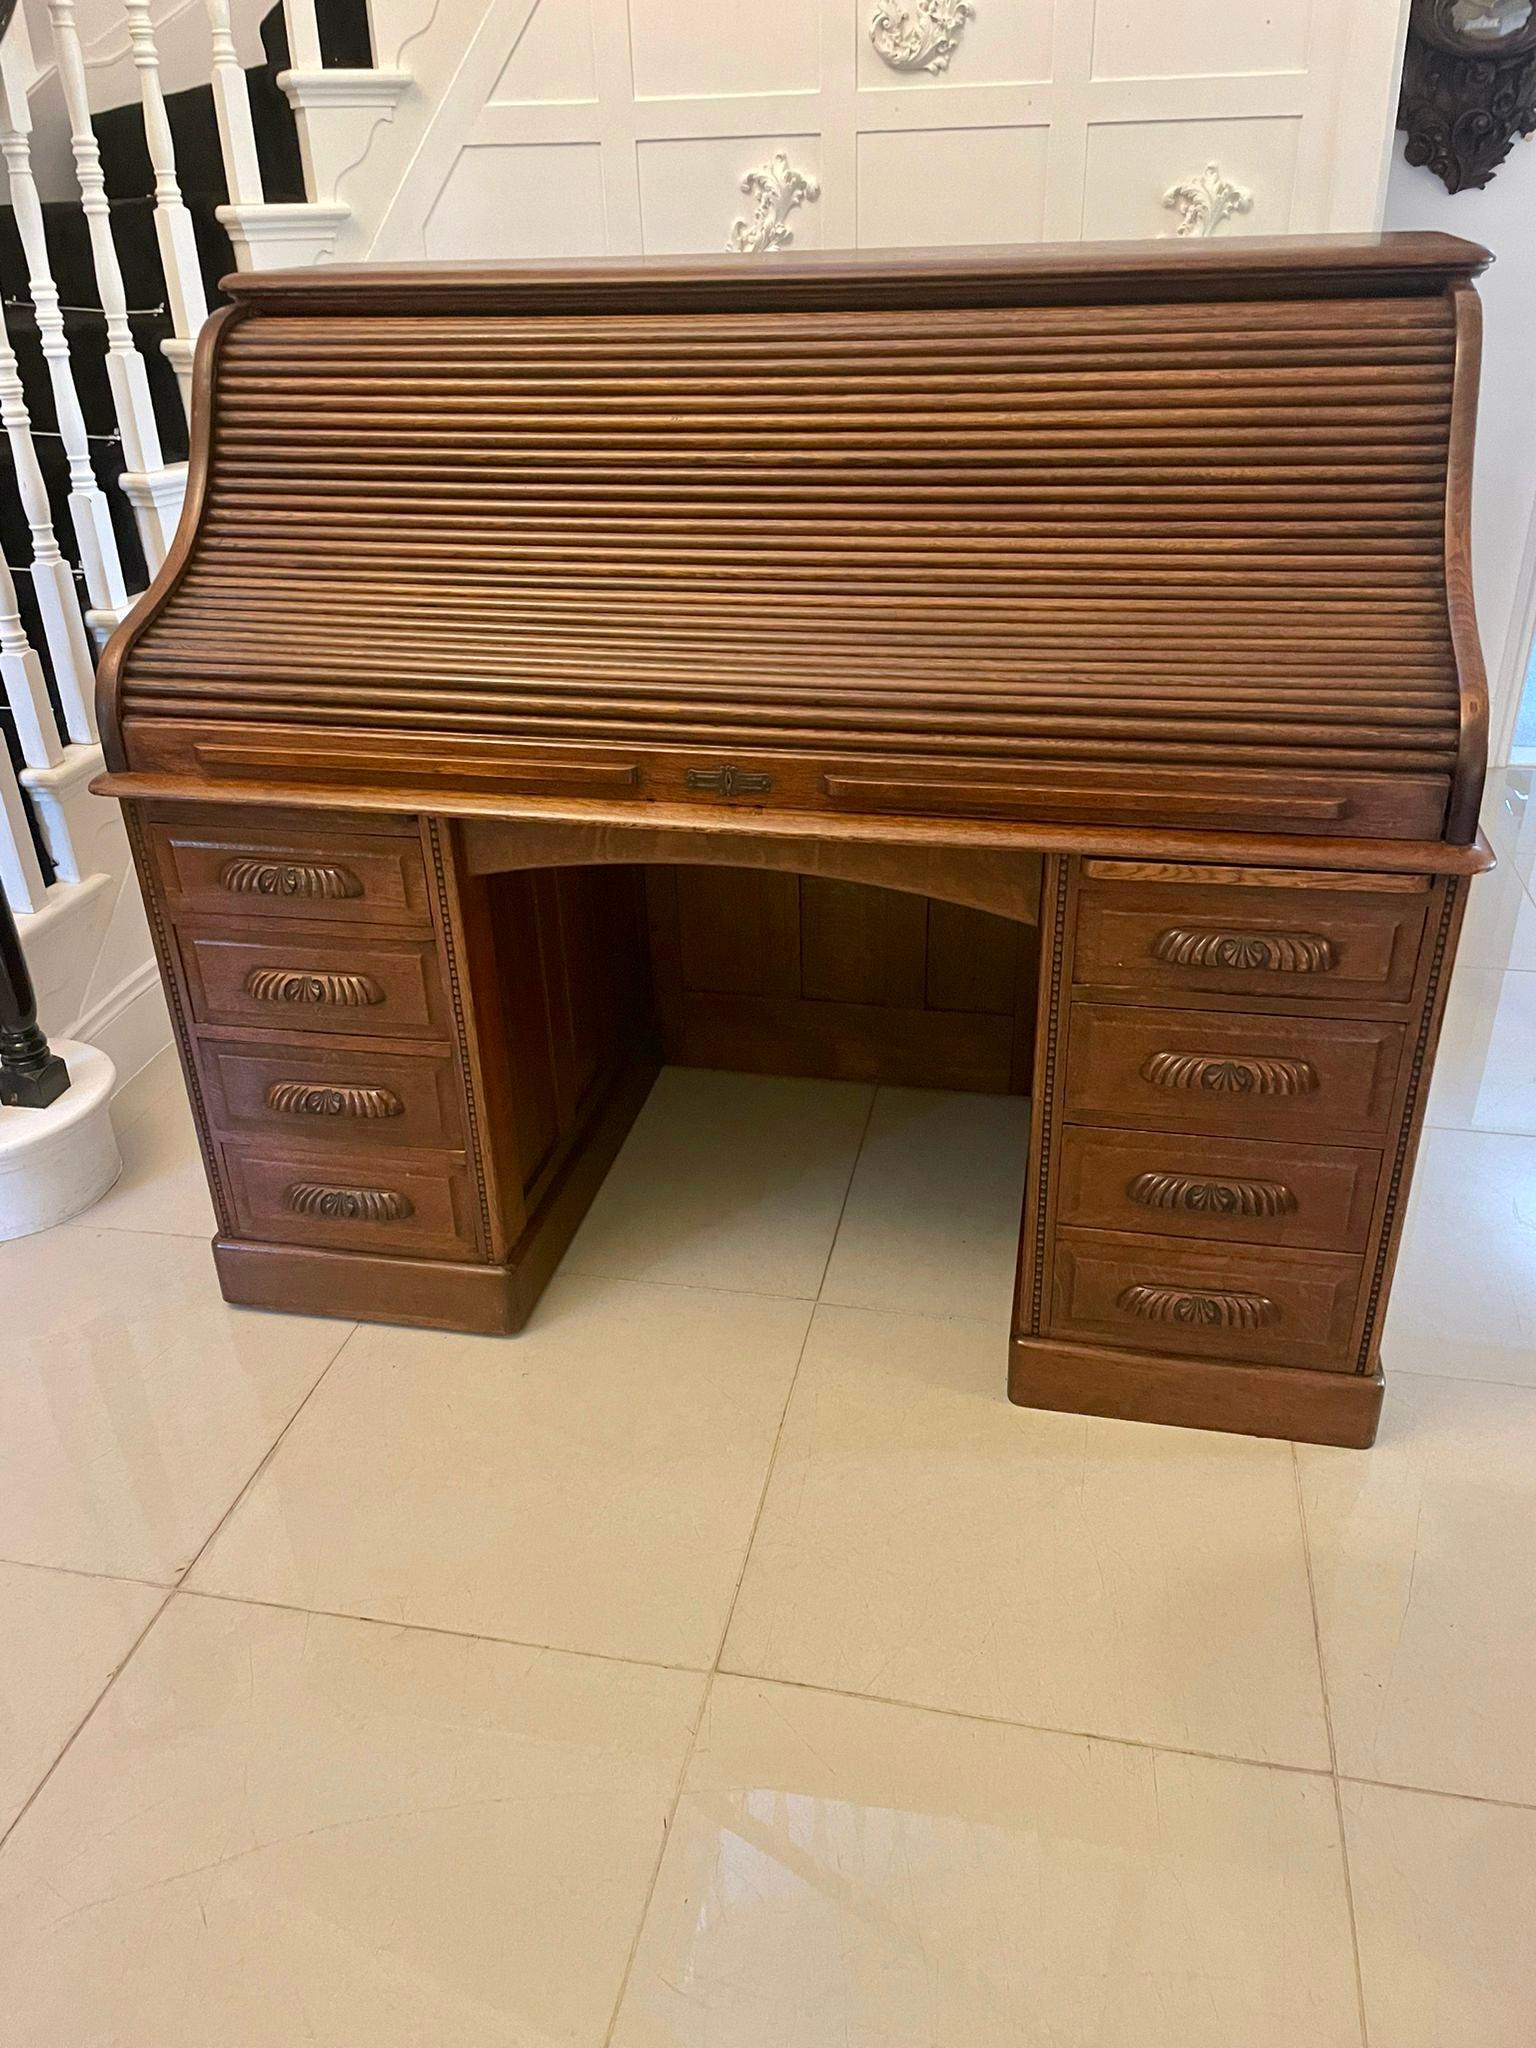 Large antique Edwardian freestanding quality oak roll top desk with fielded panels to all sides and back, quality swan neck tambour opening to reveal a fitted interior consisting of drawers, pigeon holes, pen trays, storage compartments and a